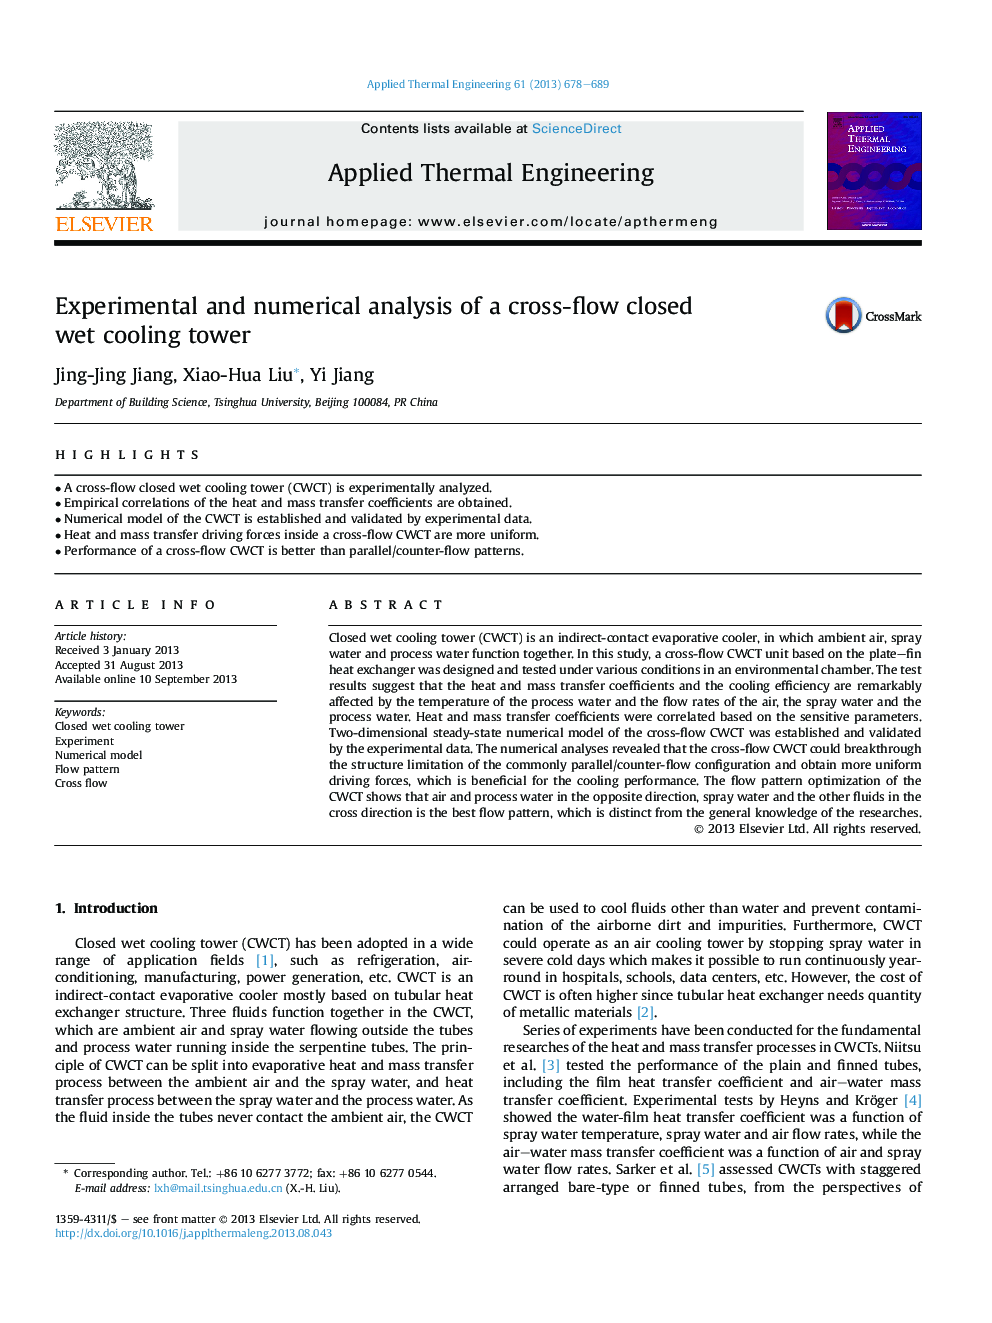 Experimental and numerical analysis of a cross-flow closed wet cooling tower